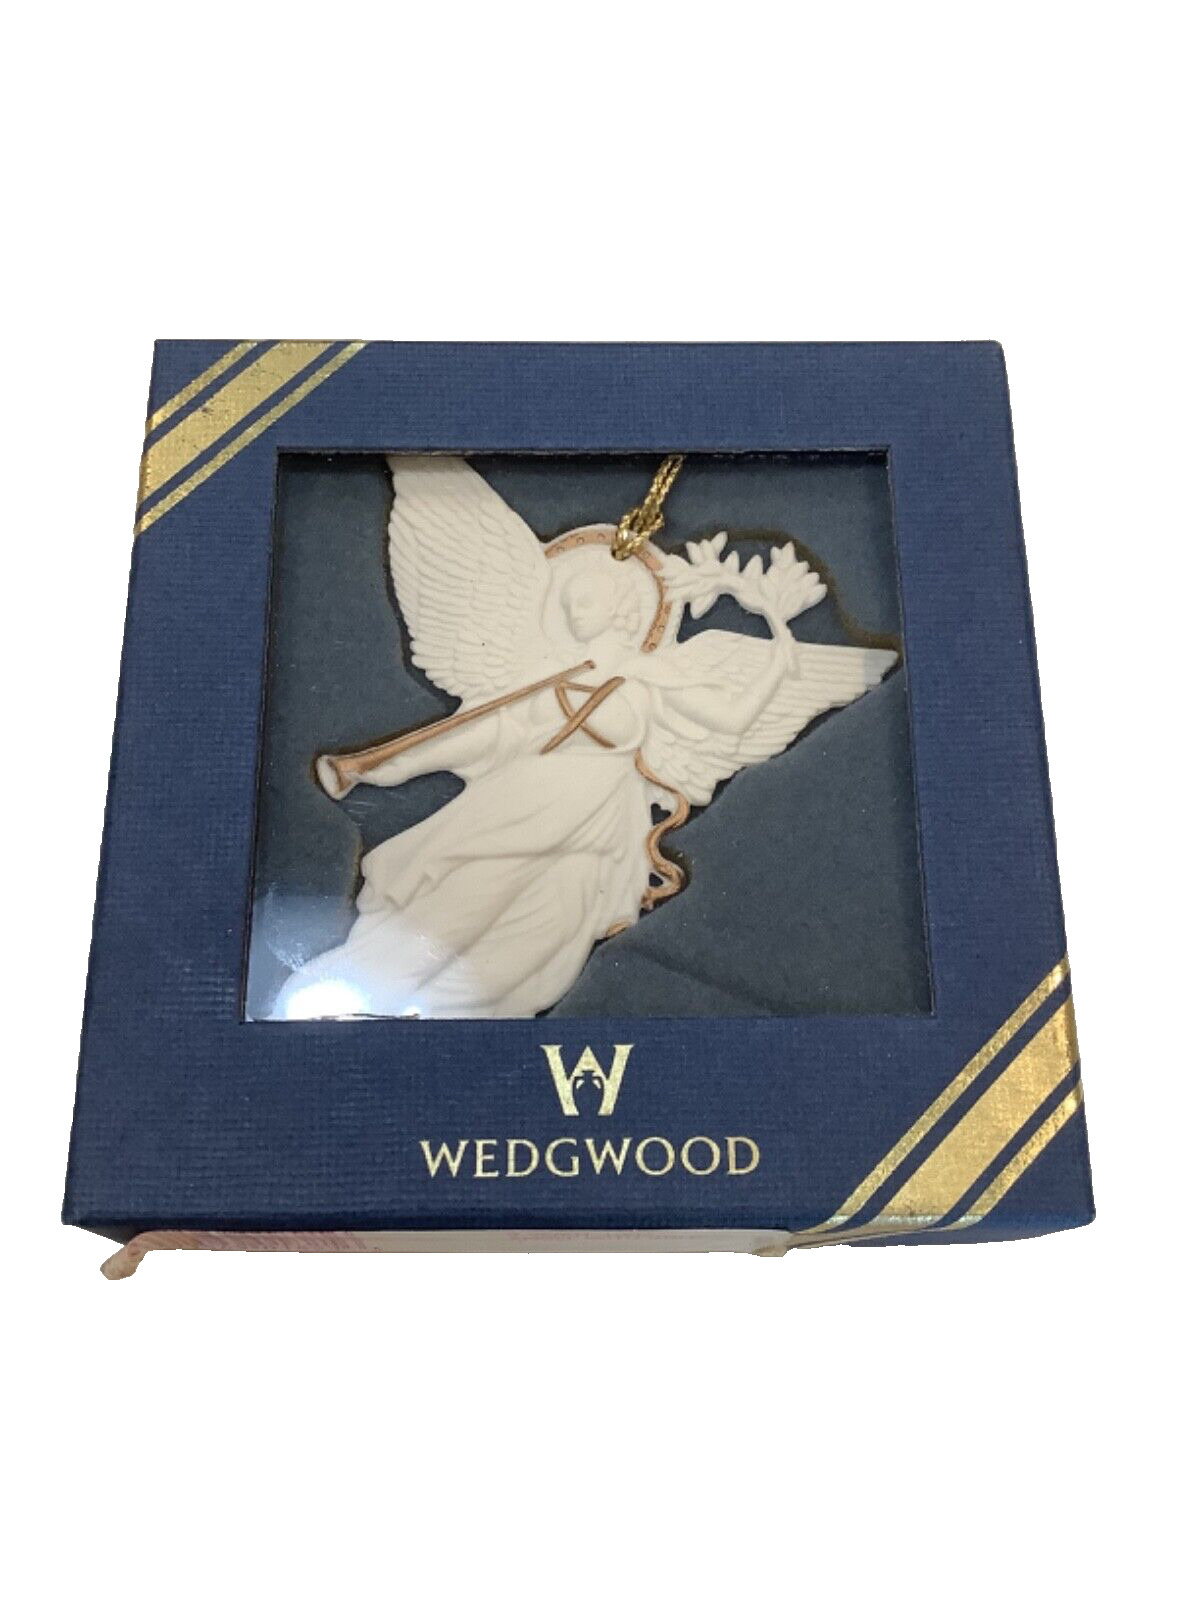 Wedgwood White Porcelain with Gold Angel with Trumpet Christmas Ornament and Box